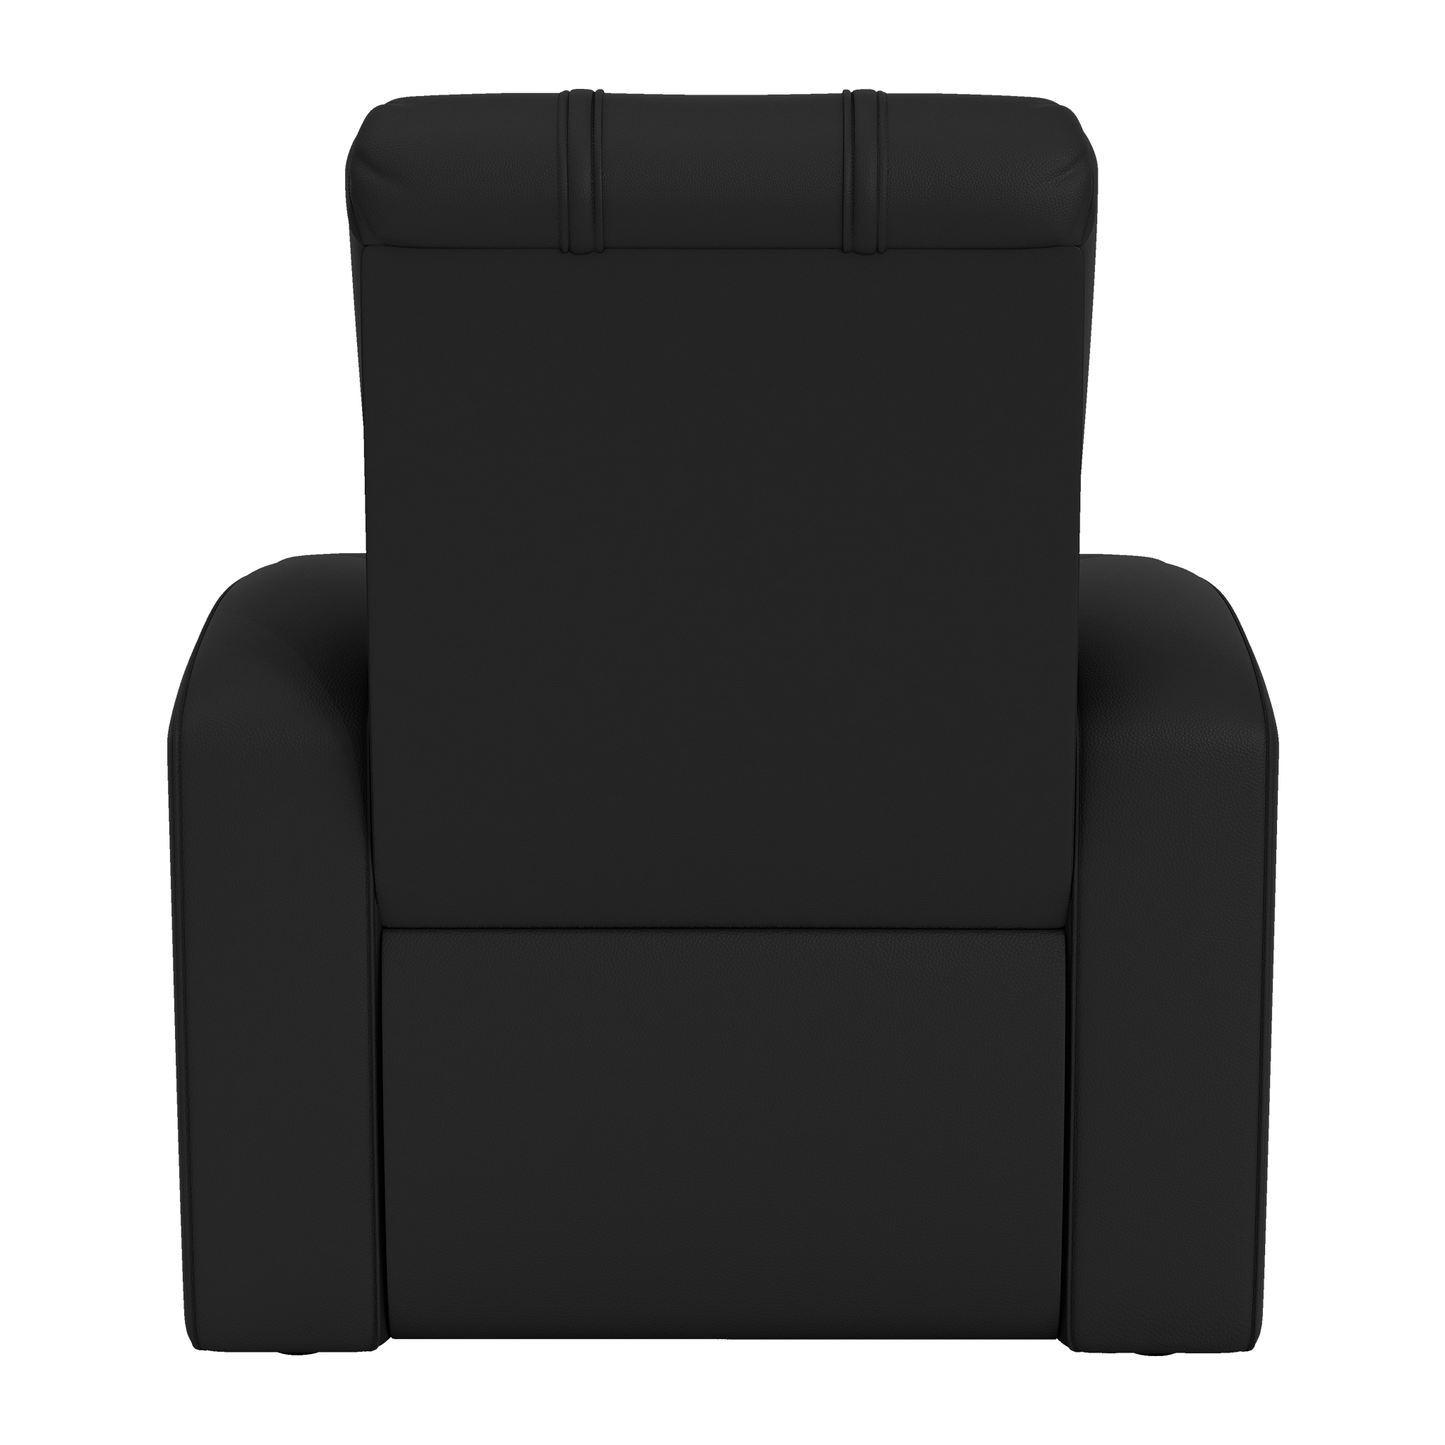 Relax Home Theater Recliner with Texas Rangers Cooperstown